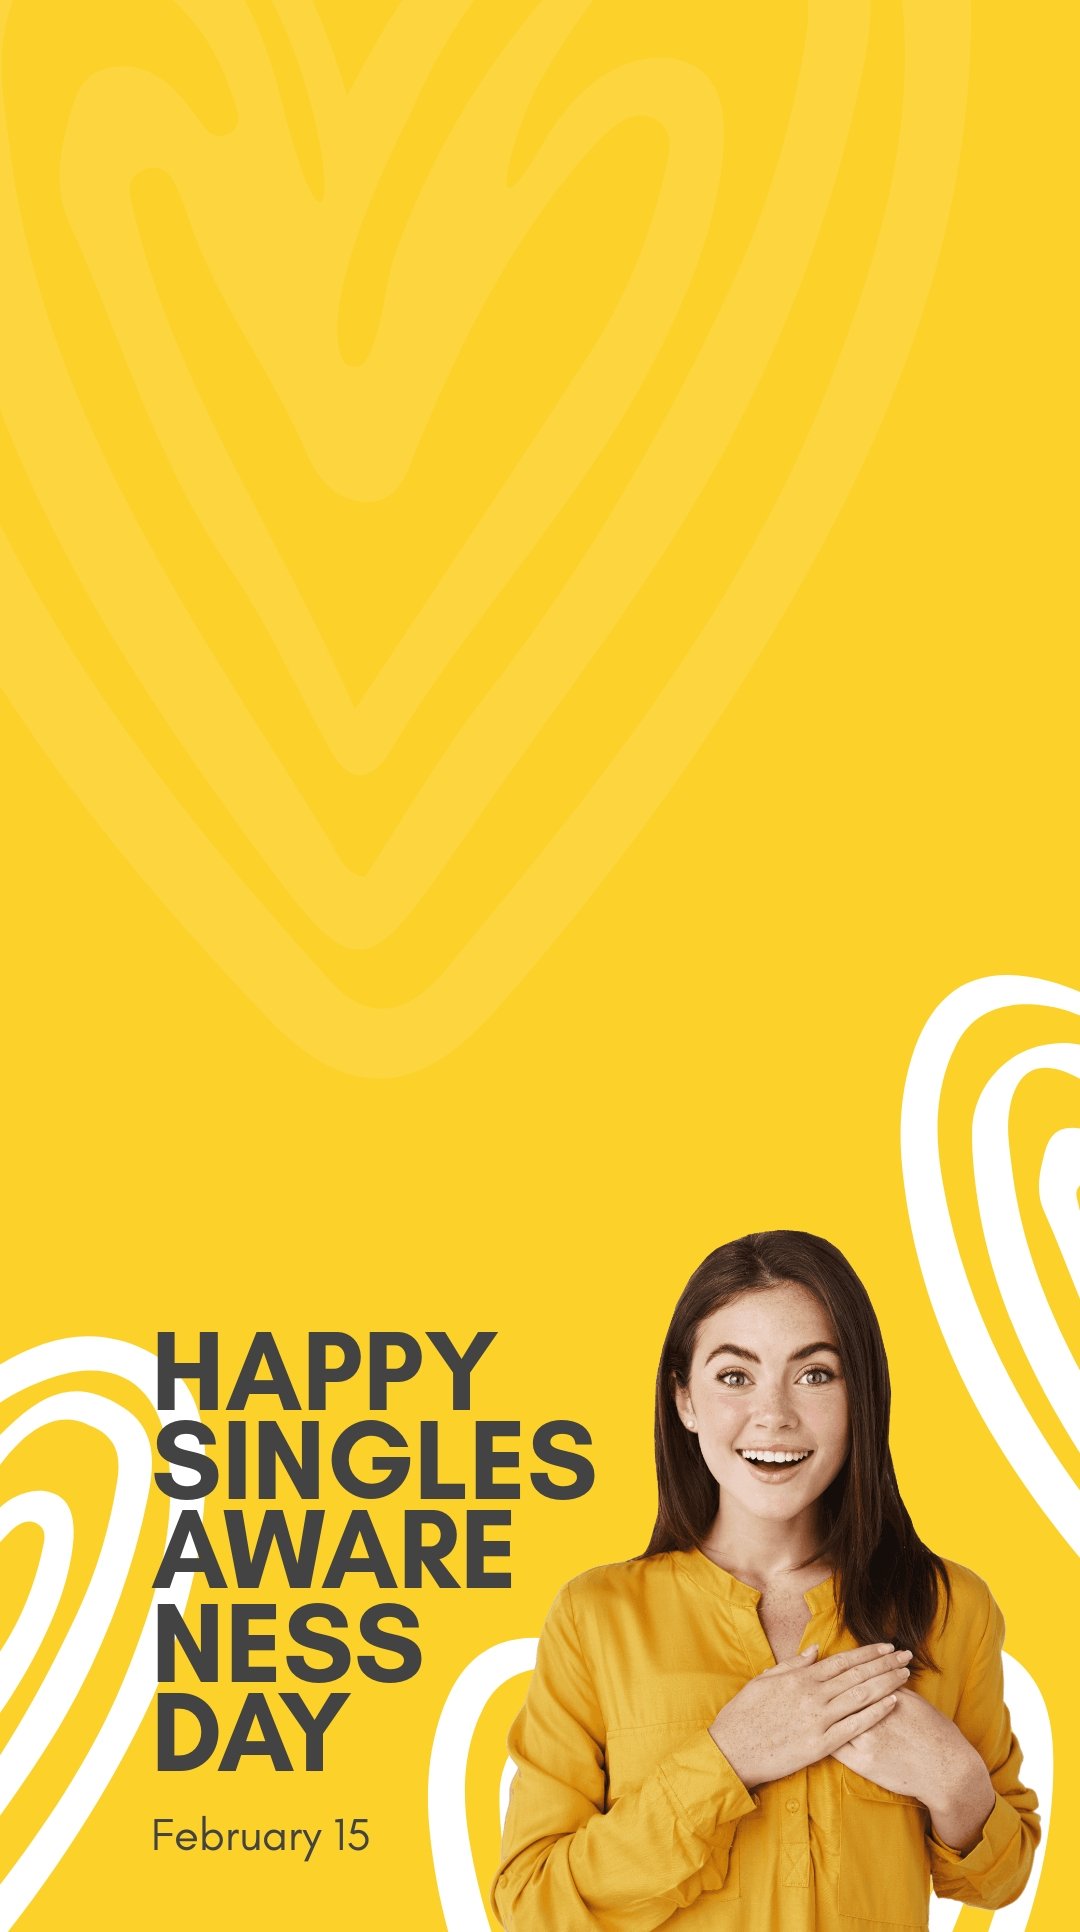 Happy Singles Awareness Day Snapchat Geofilter Template